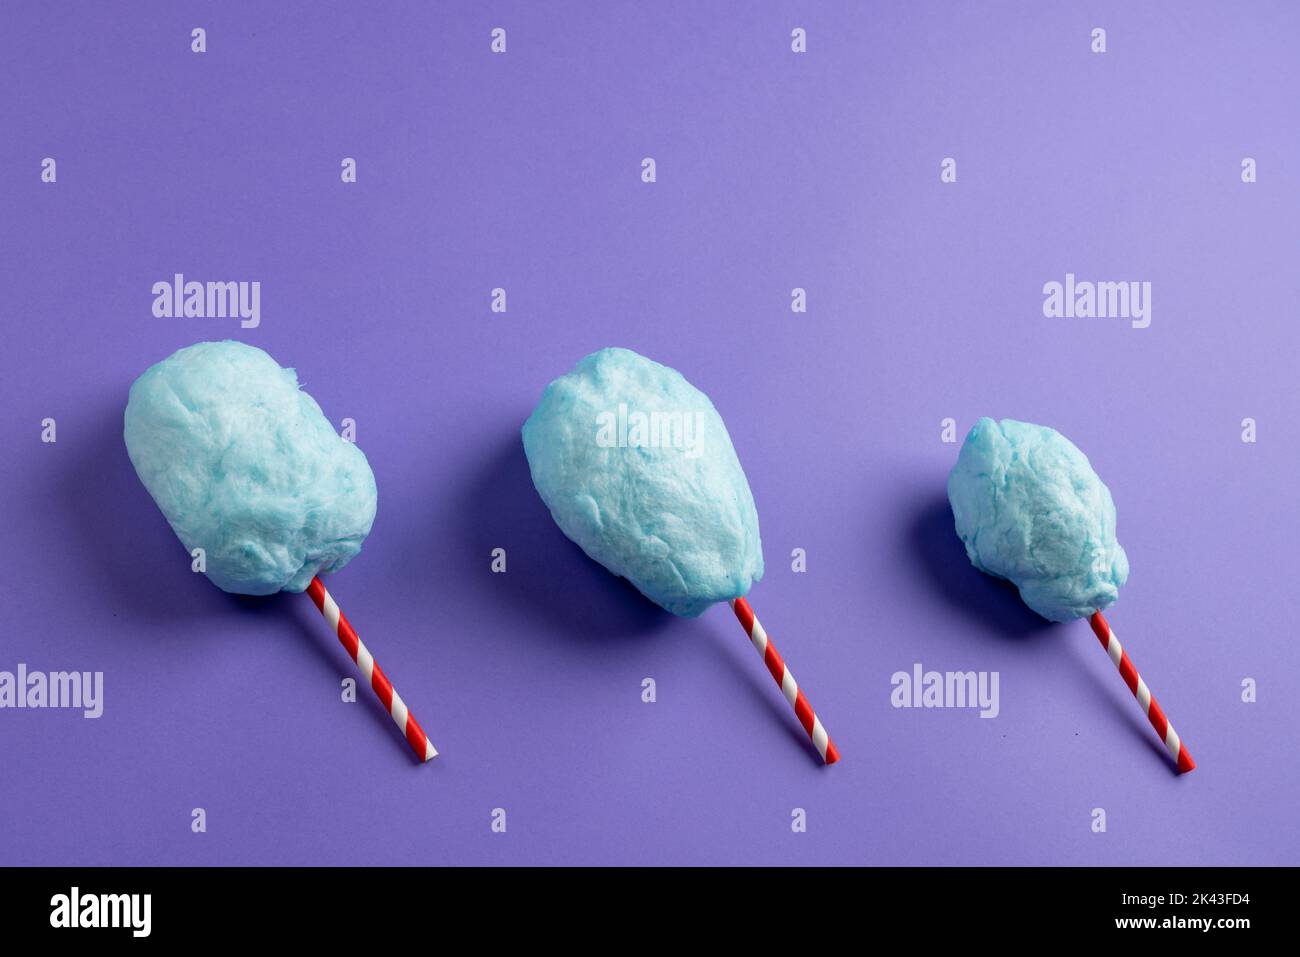 Horizontal image of homemade blue candy floss on three striped sticks, on purple with copy space Stock Photo